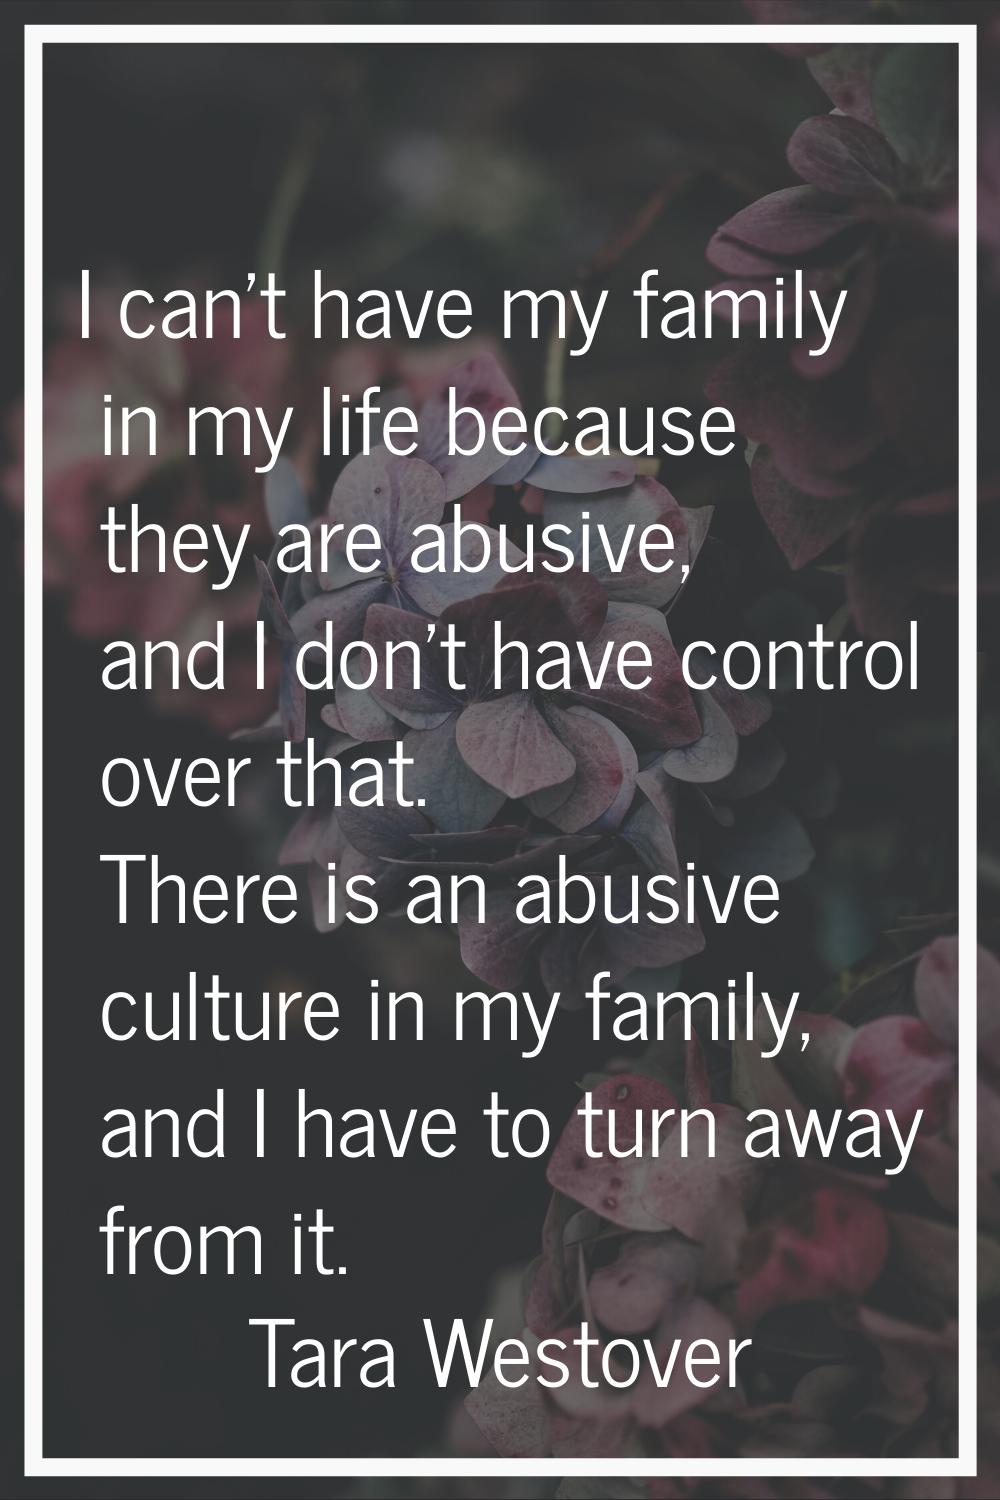 I can't have my family in my life because they are abusive, and I don't have control over that. The